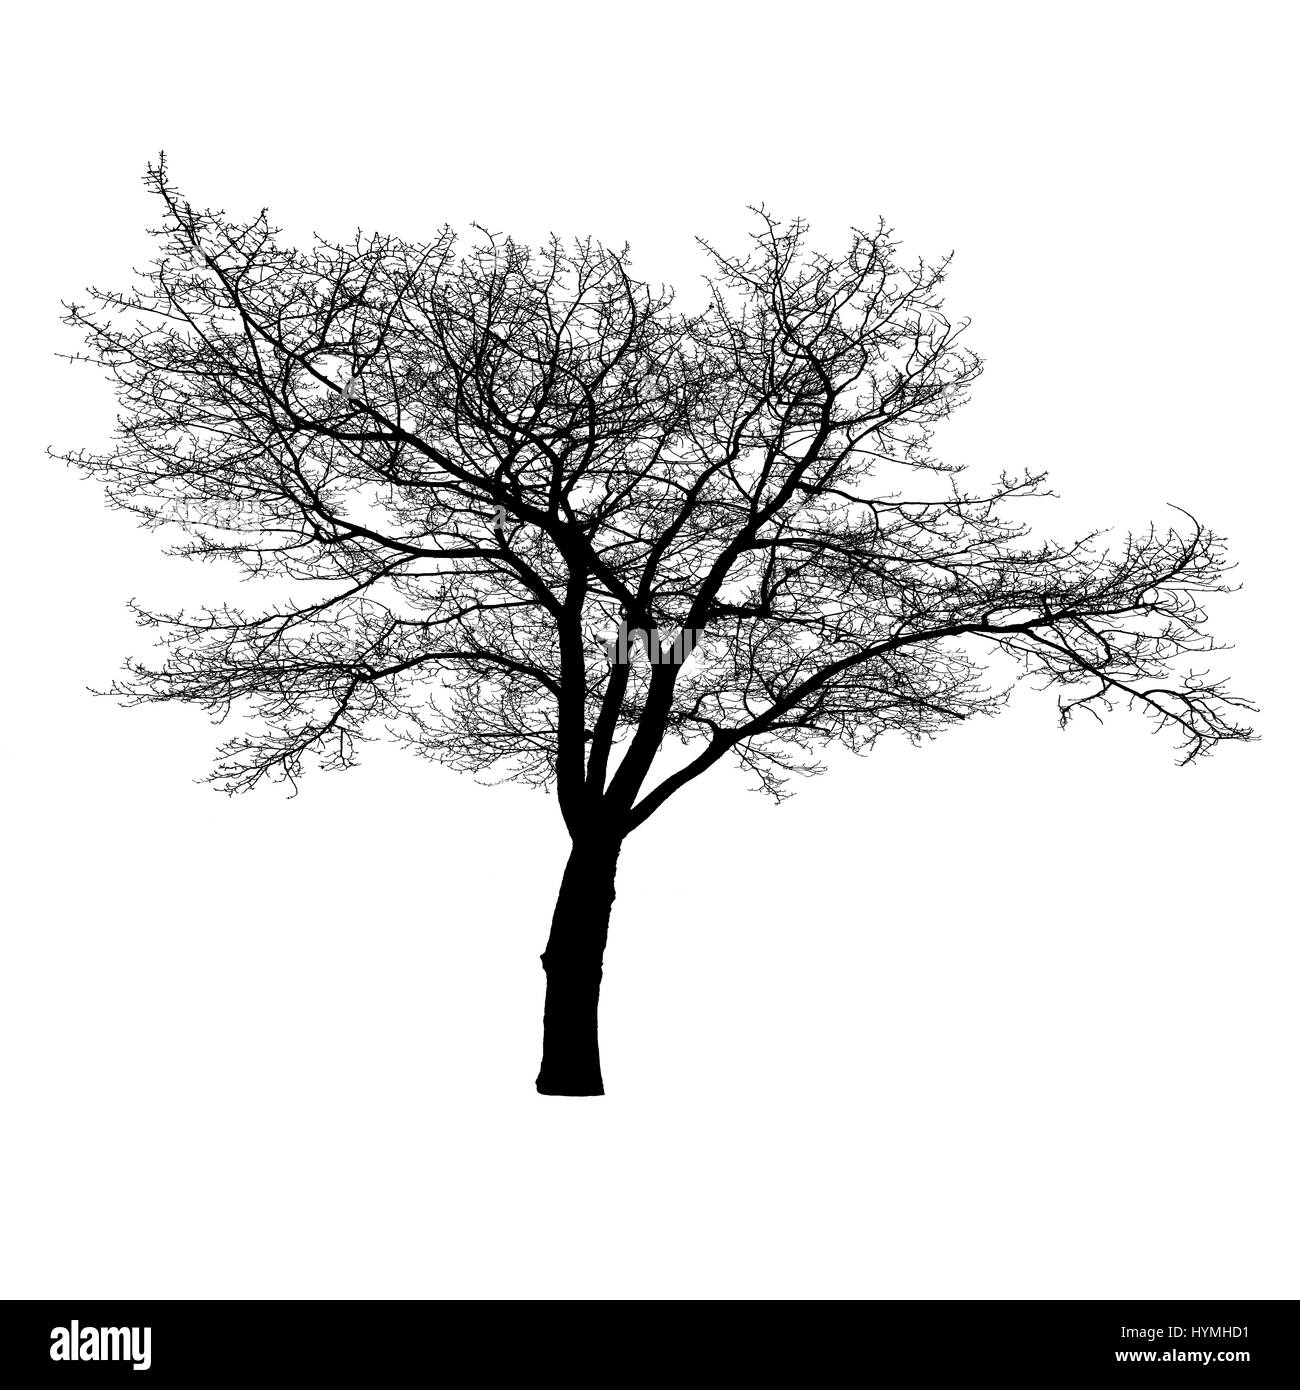 Tree silhouette without leaves isolated on the white background. Stock Photo